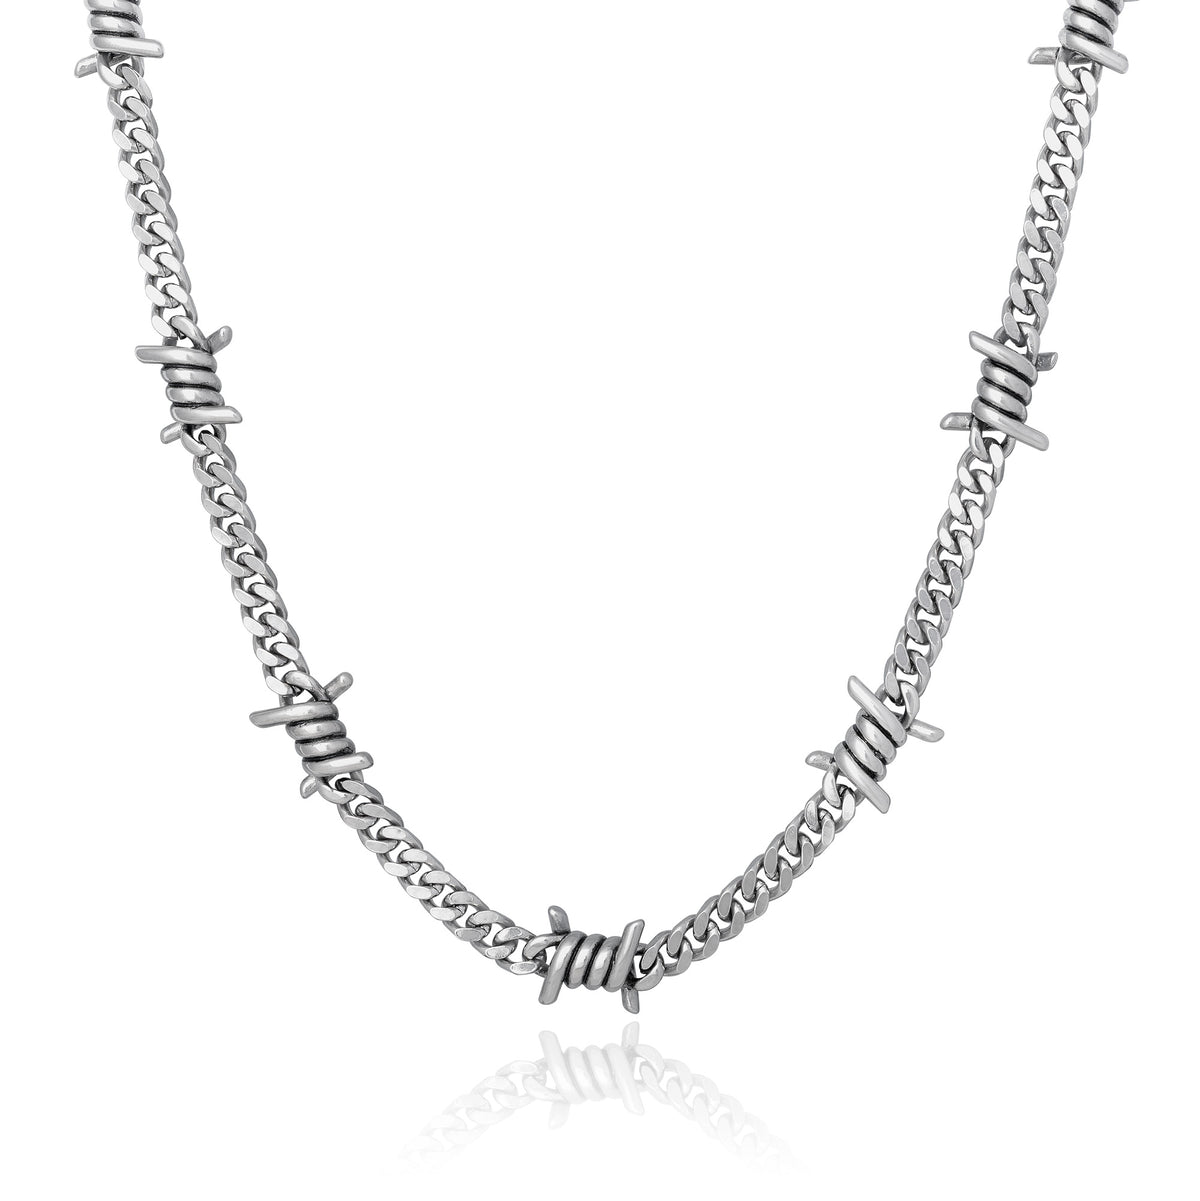 Silver cuban link necklace chain with barbed wire pendants